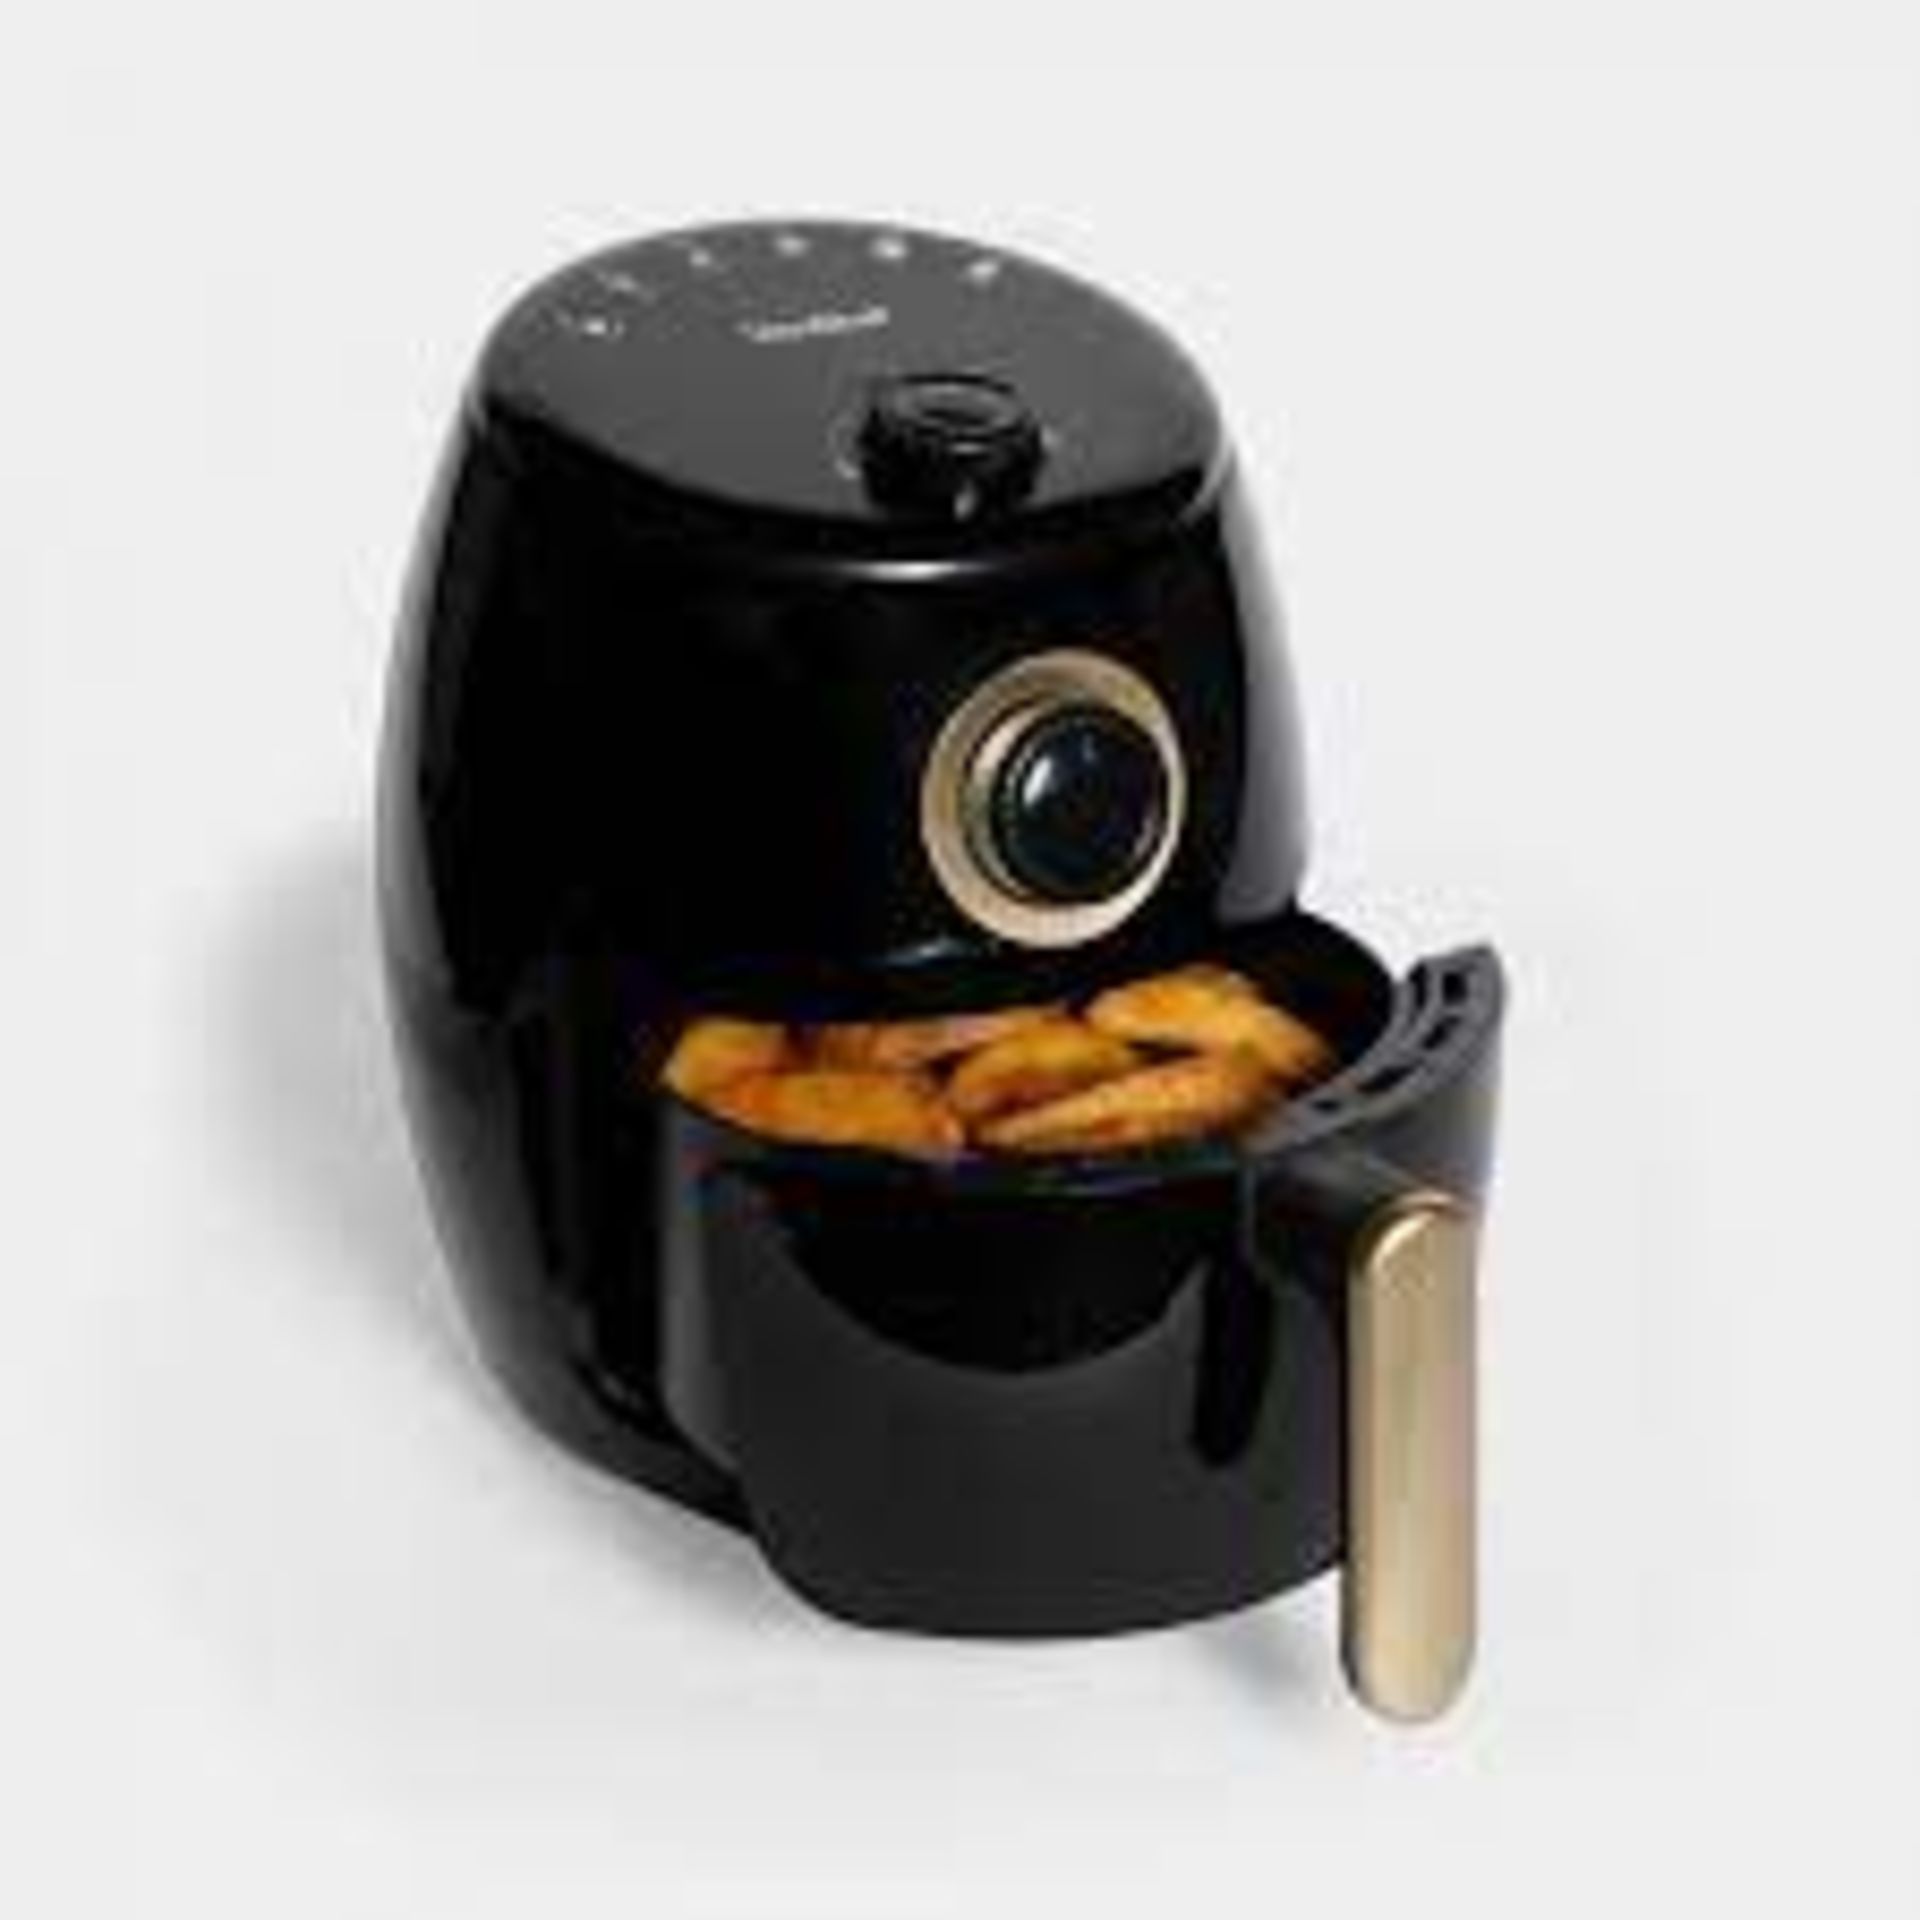 BRAND NEW 2L 1000W AIR FRYER WITH AUTOMATIC SHUT OFF AND READY ALERT, ADJUSTABLE TEMPERATURE BETWEEN